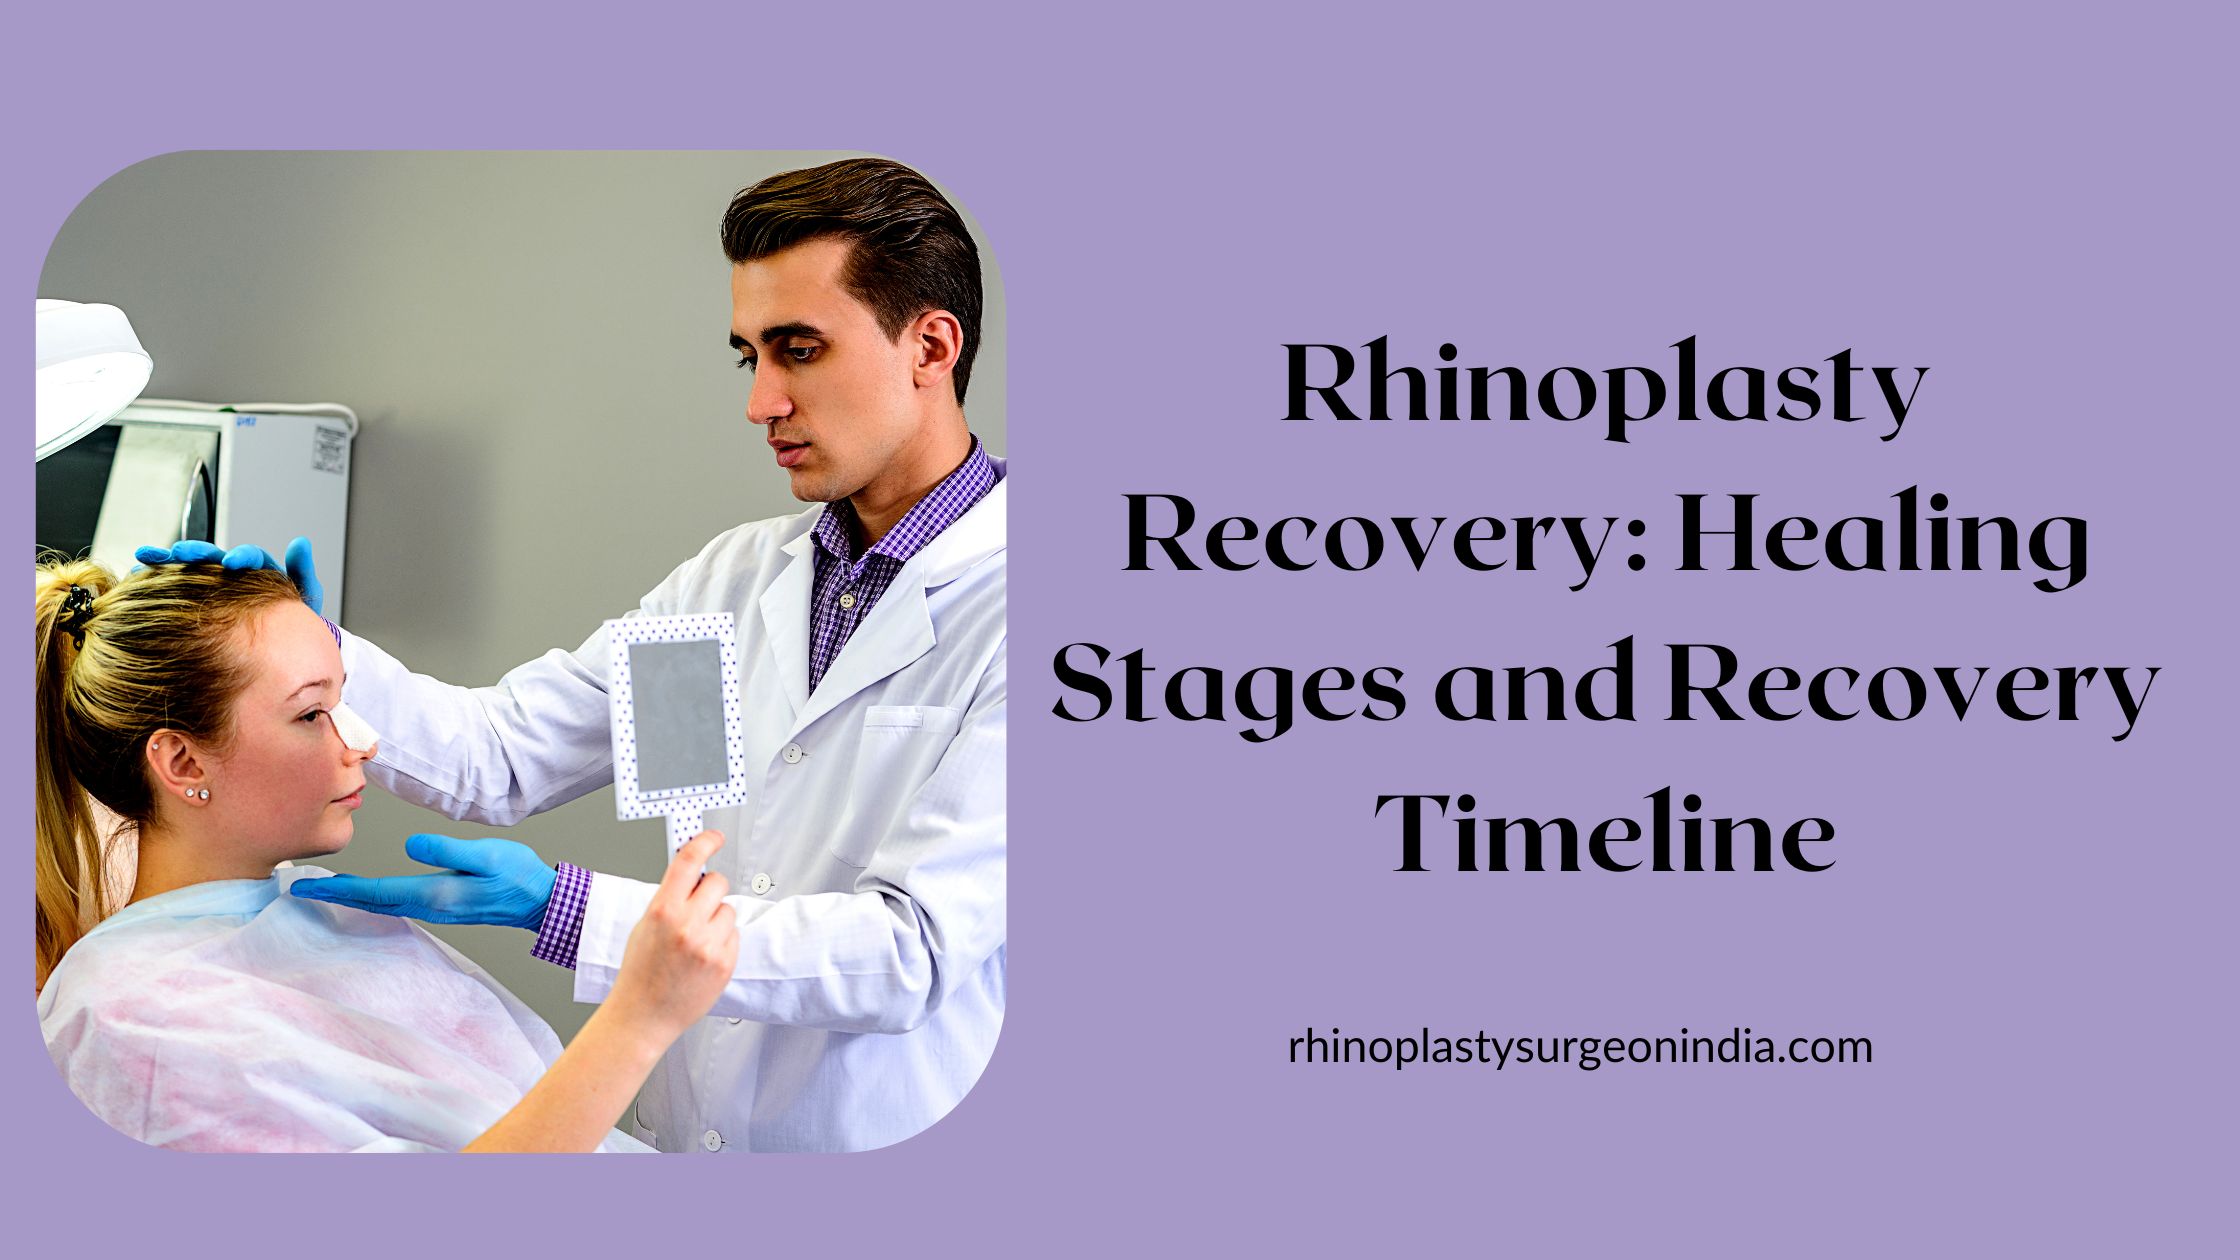 Rhinoplasty Recovery: Healing Stages and Recovery Timeline